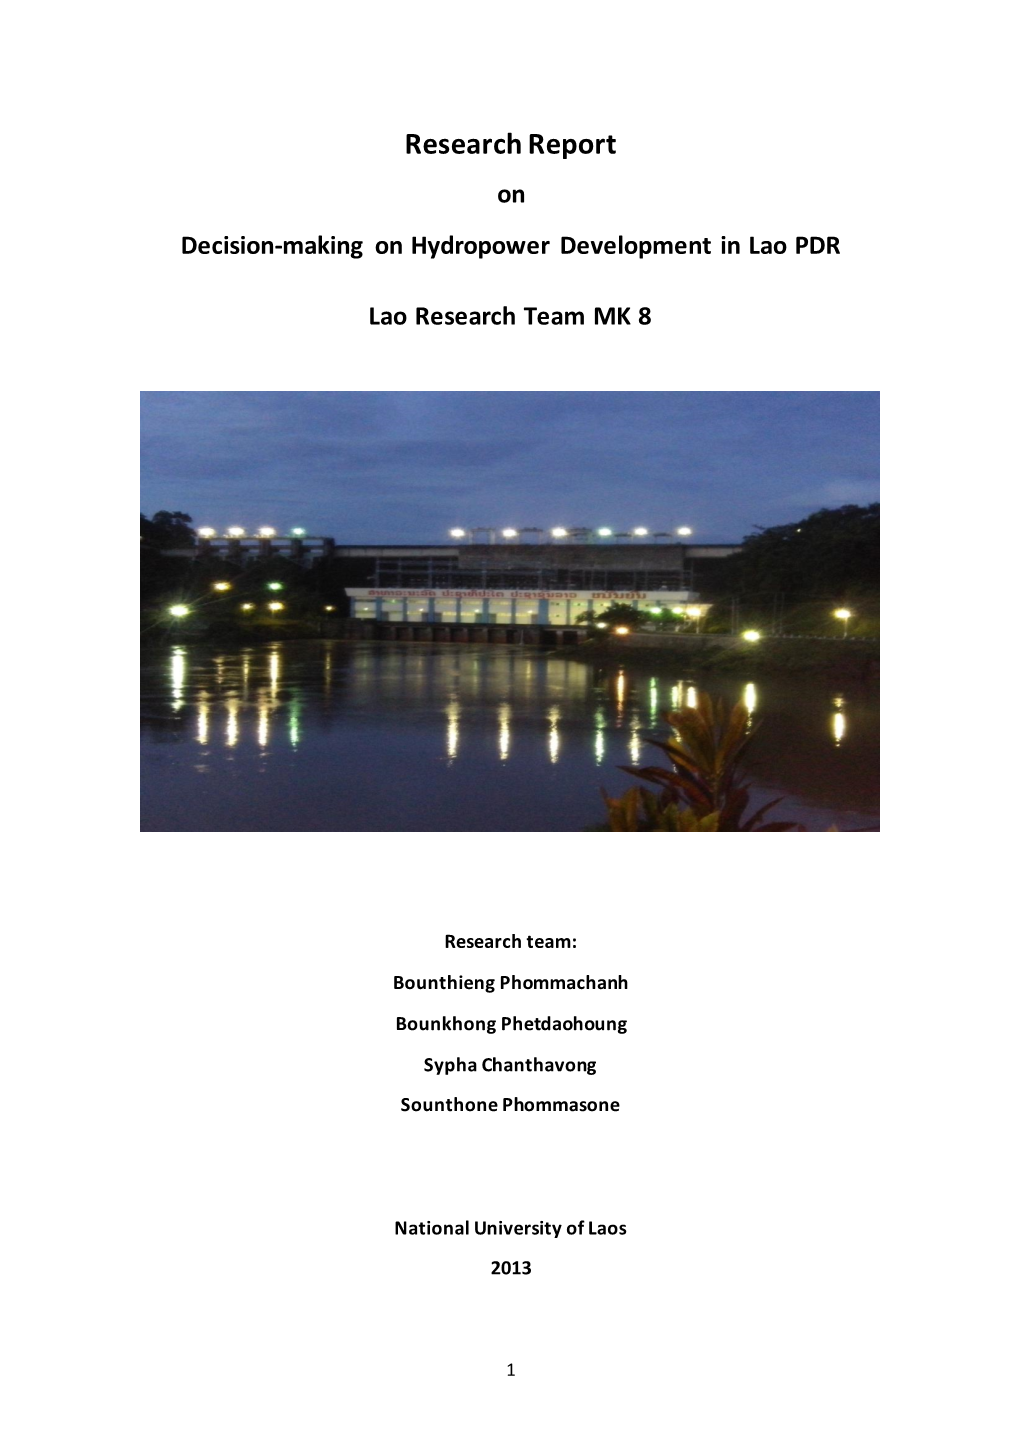 Research Report on Decision-Making on Hydropower Development in Lao PDR